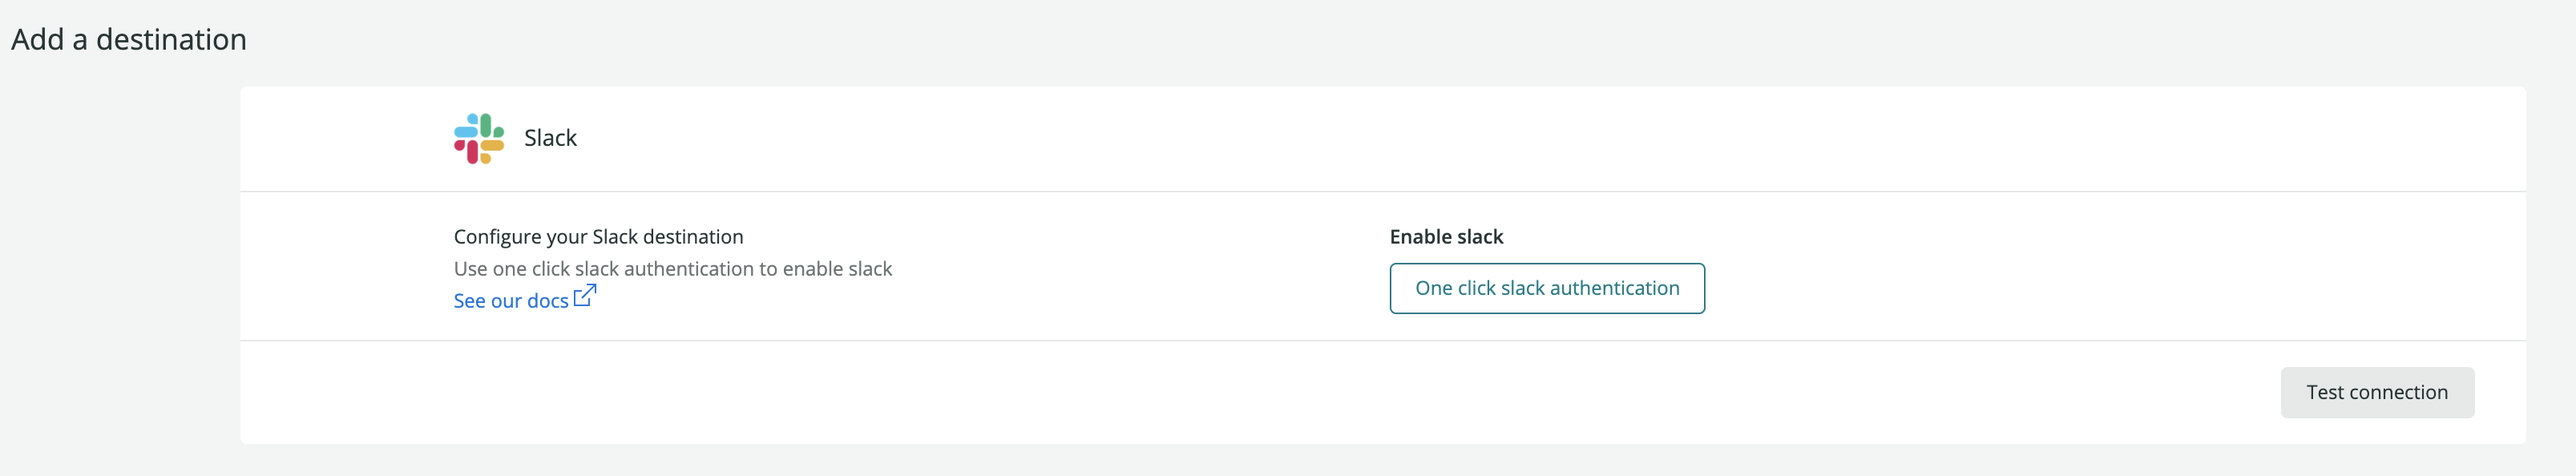 A screenshot of the one-click Slack authentication.